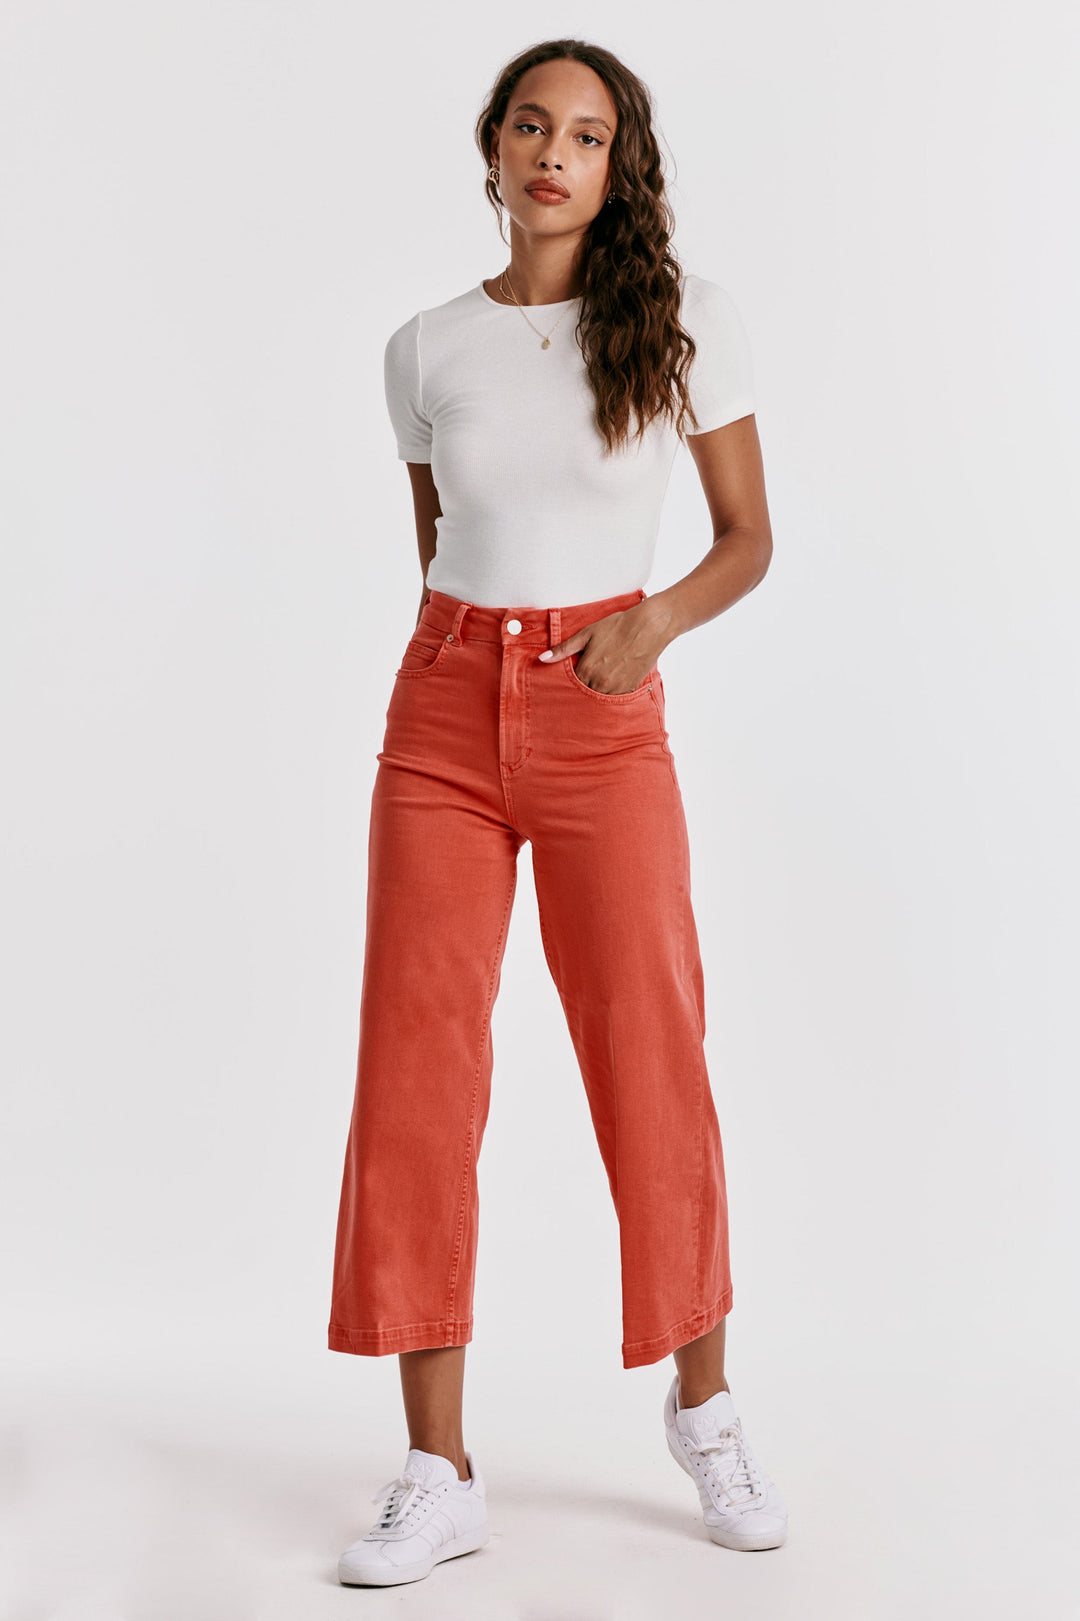 image of a female model wearing a AUDREY SUPER HIGH RISE CROPPED WIDE LEG COLOR JEANS RADIENT RED DEAR JOHN DENIM 